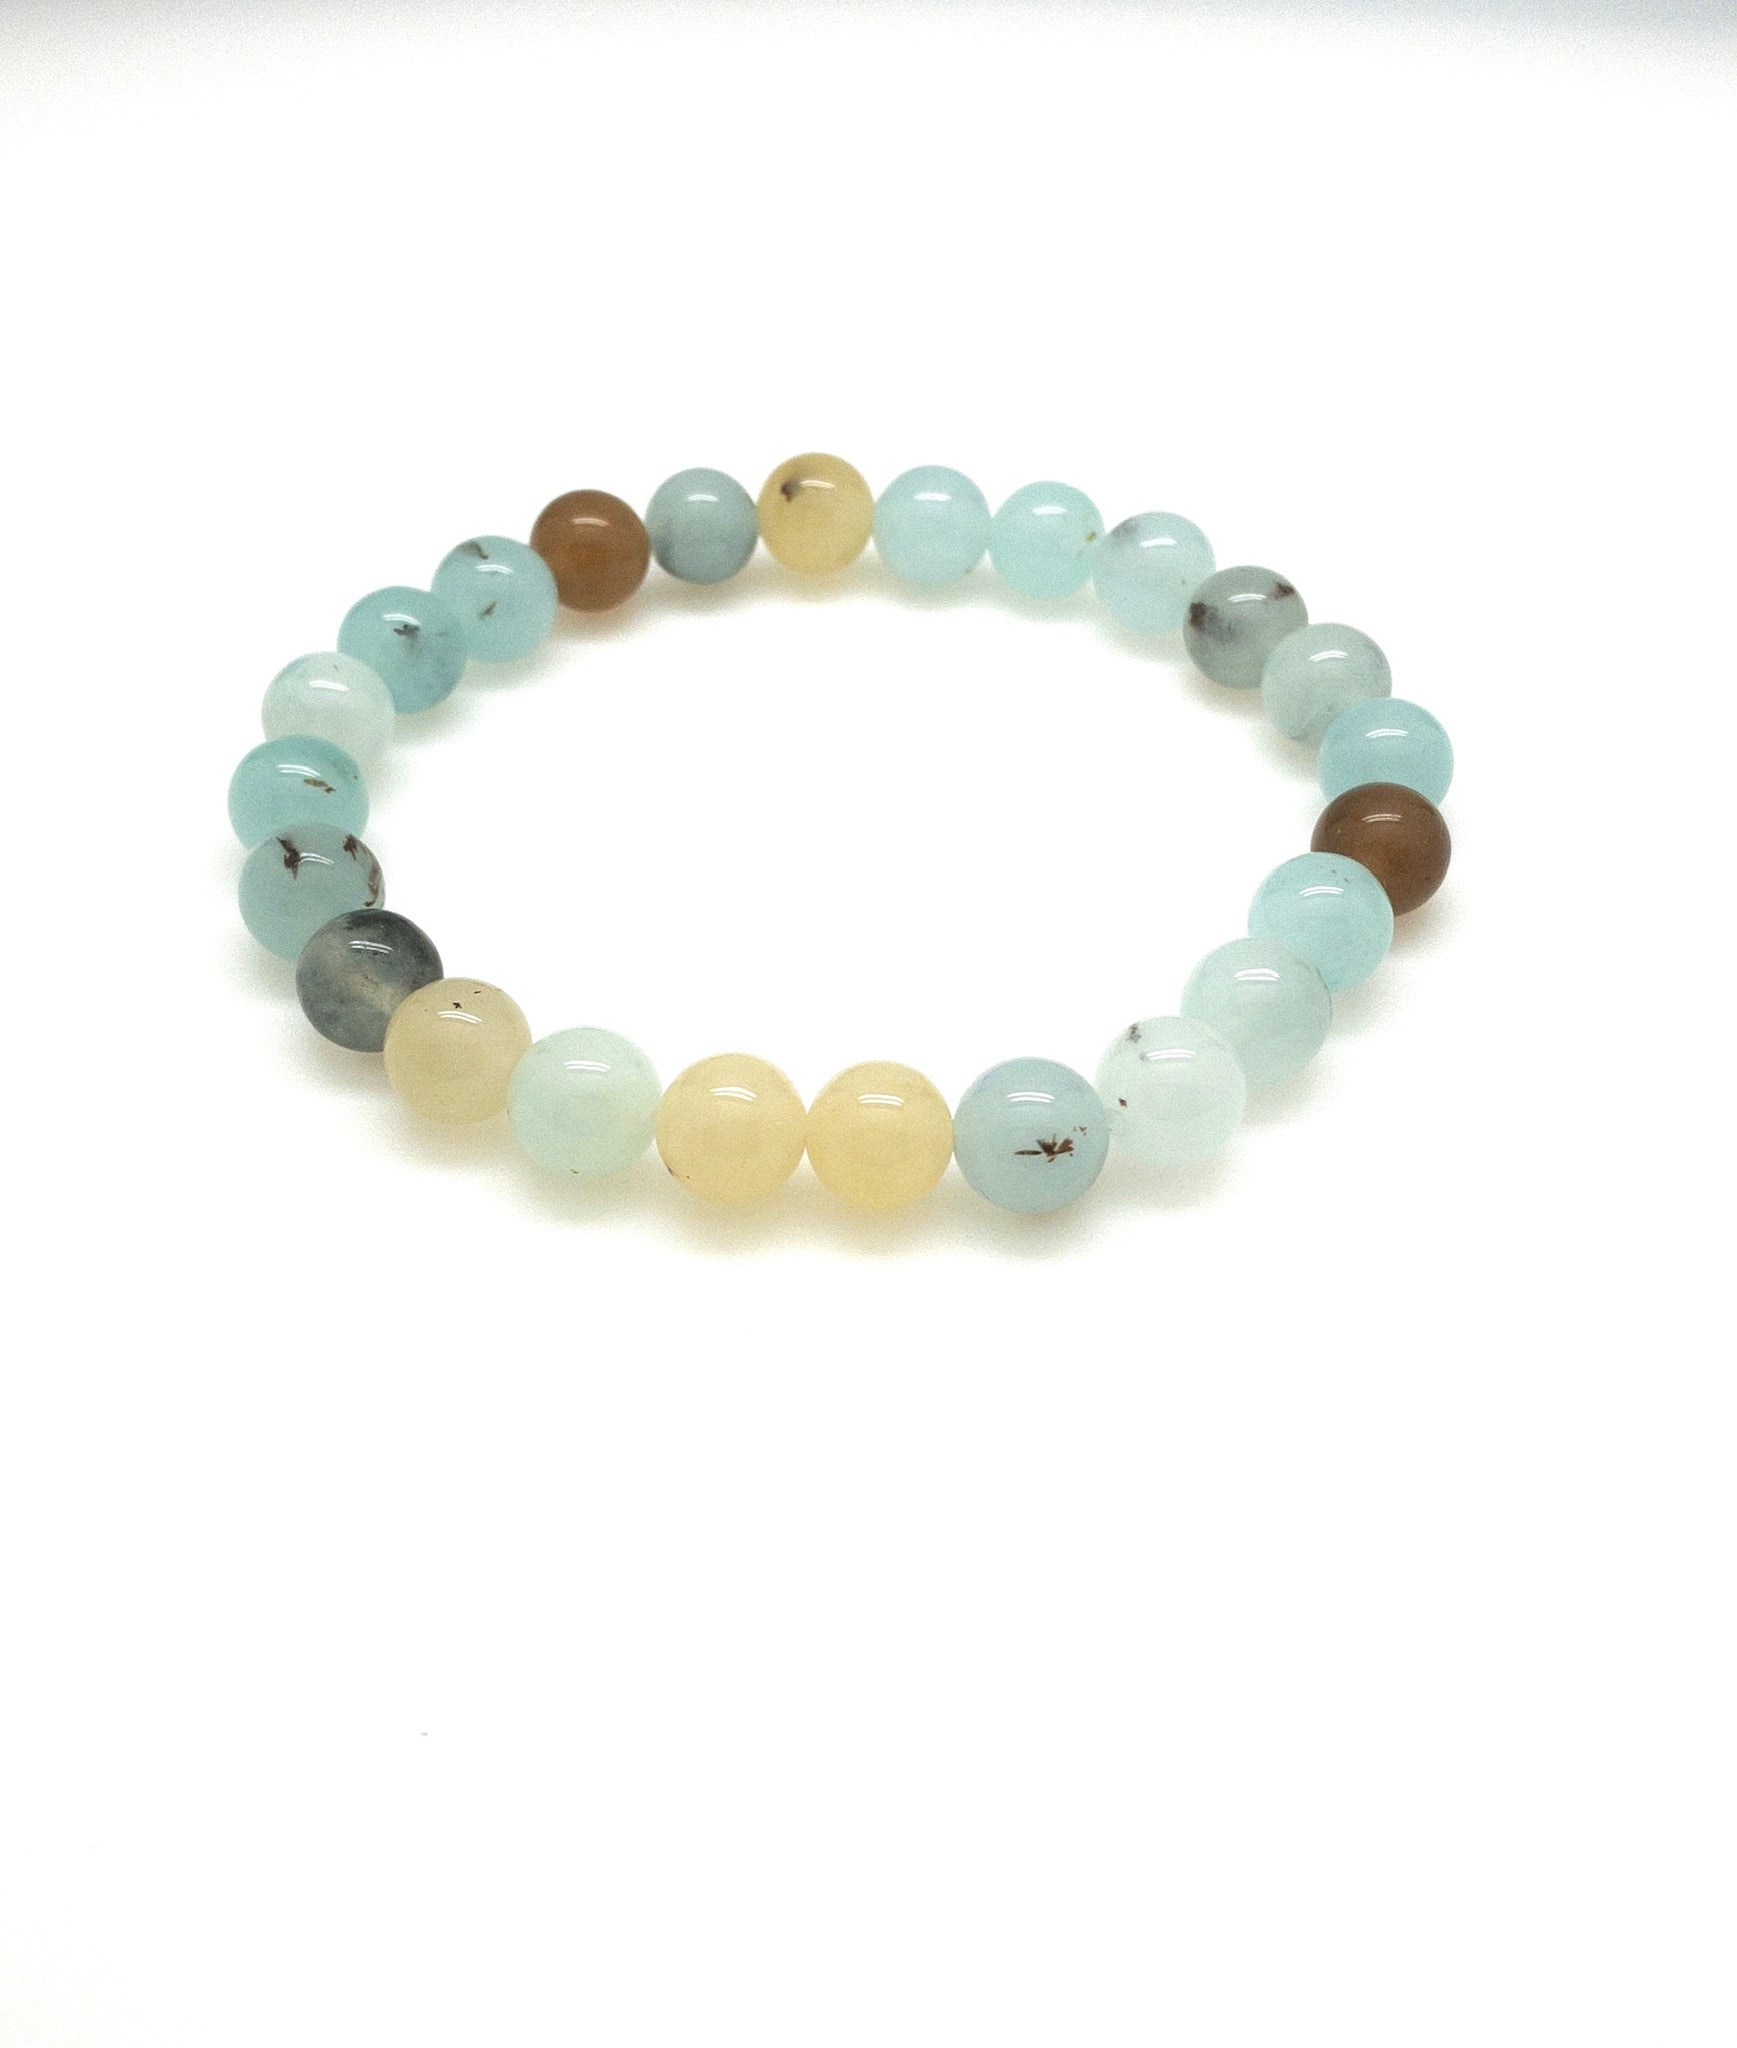 agate bracelet. all real stones turned to beads. blues, tans, greys, greens Danna 